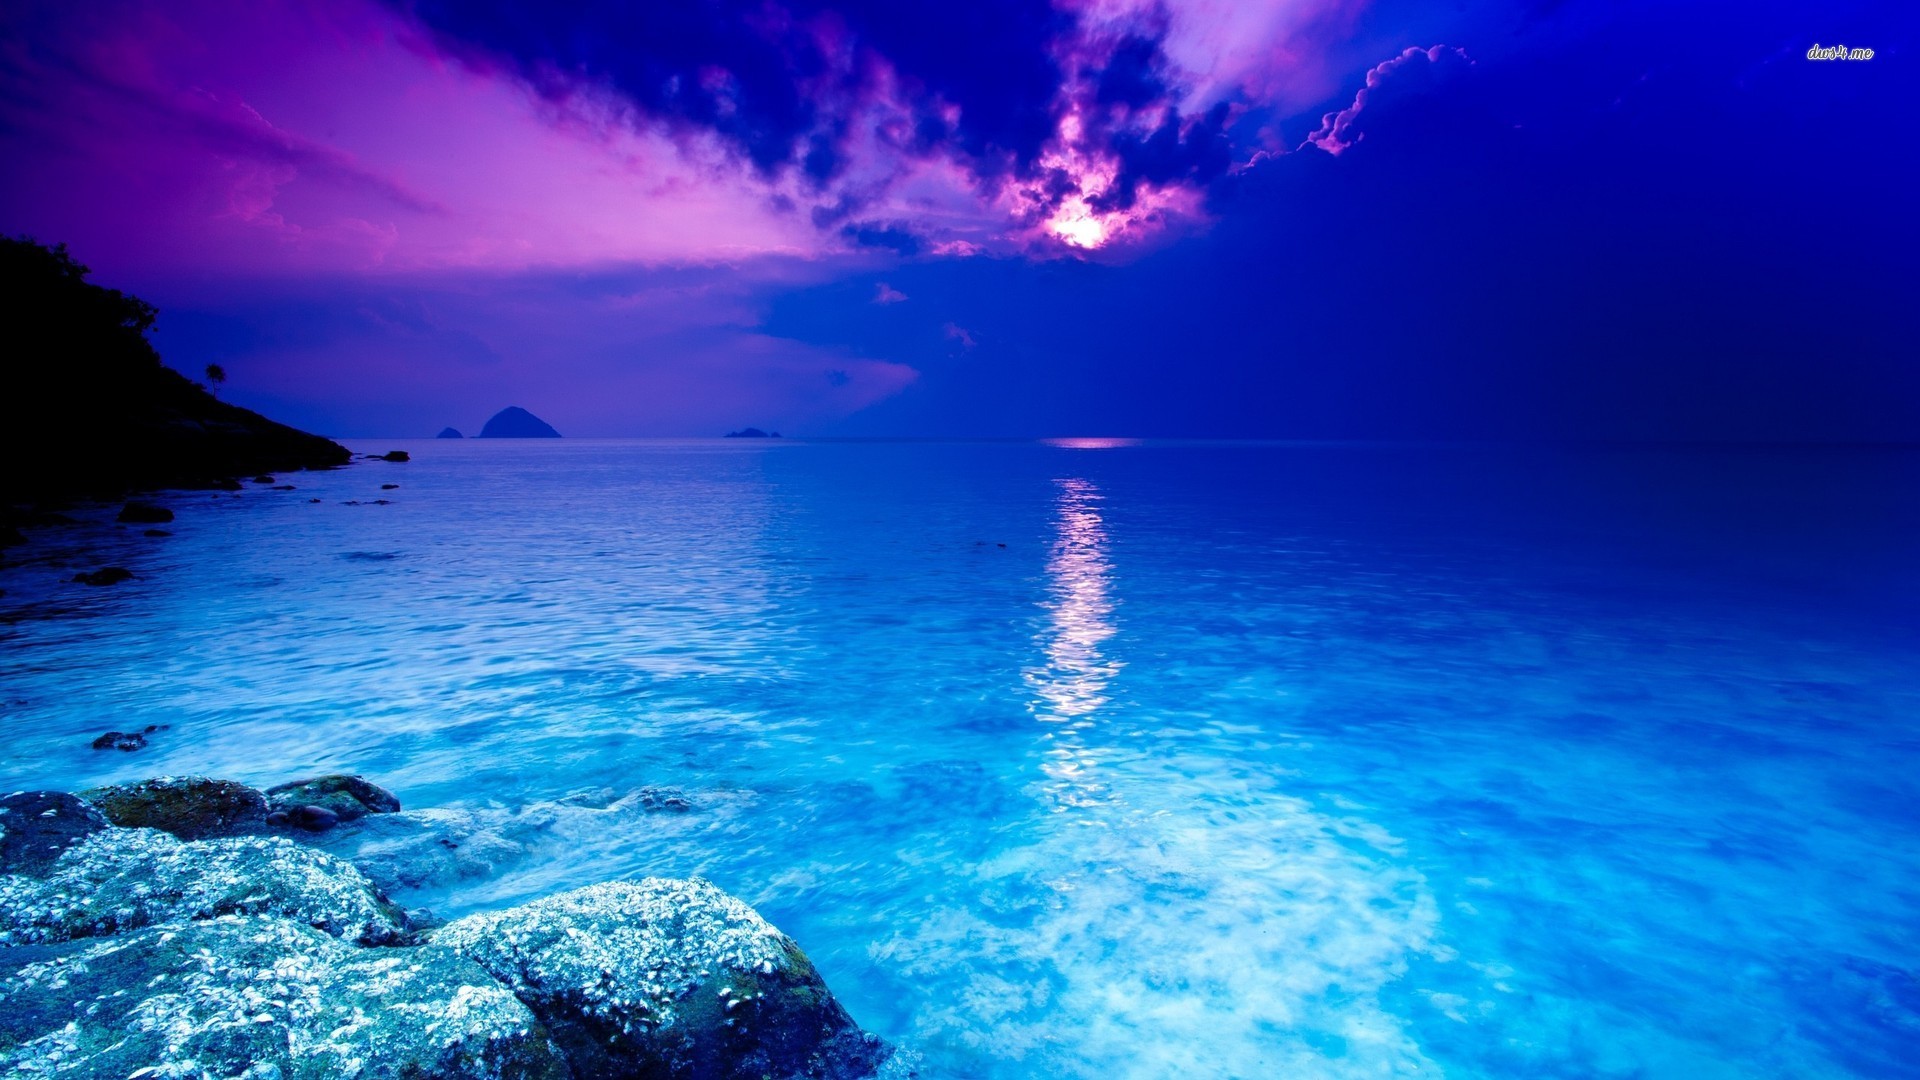 1920x1080 99 best Blue Sea images on Pinterest | Nature, Water and Landscapes Blue Ocean  Wallpaper - WallpaperSafari ...